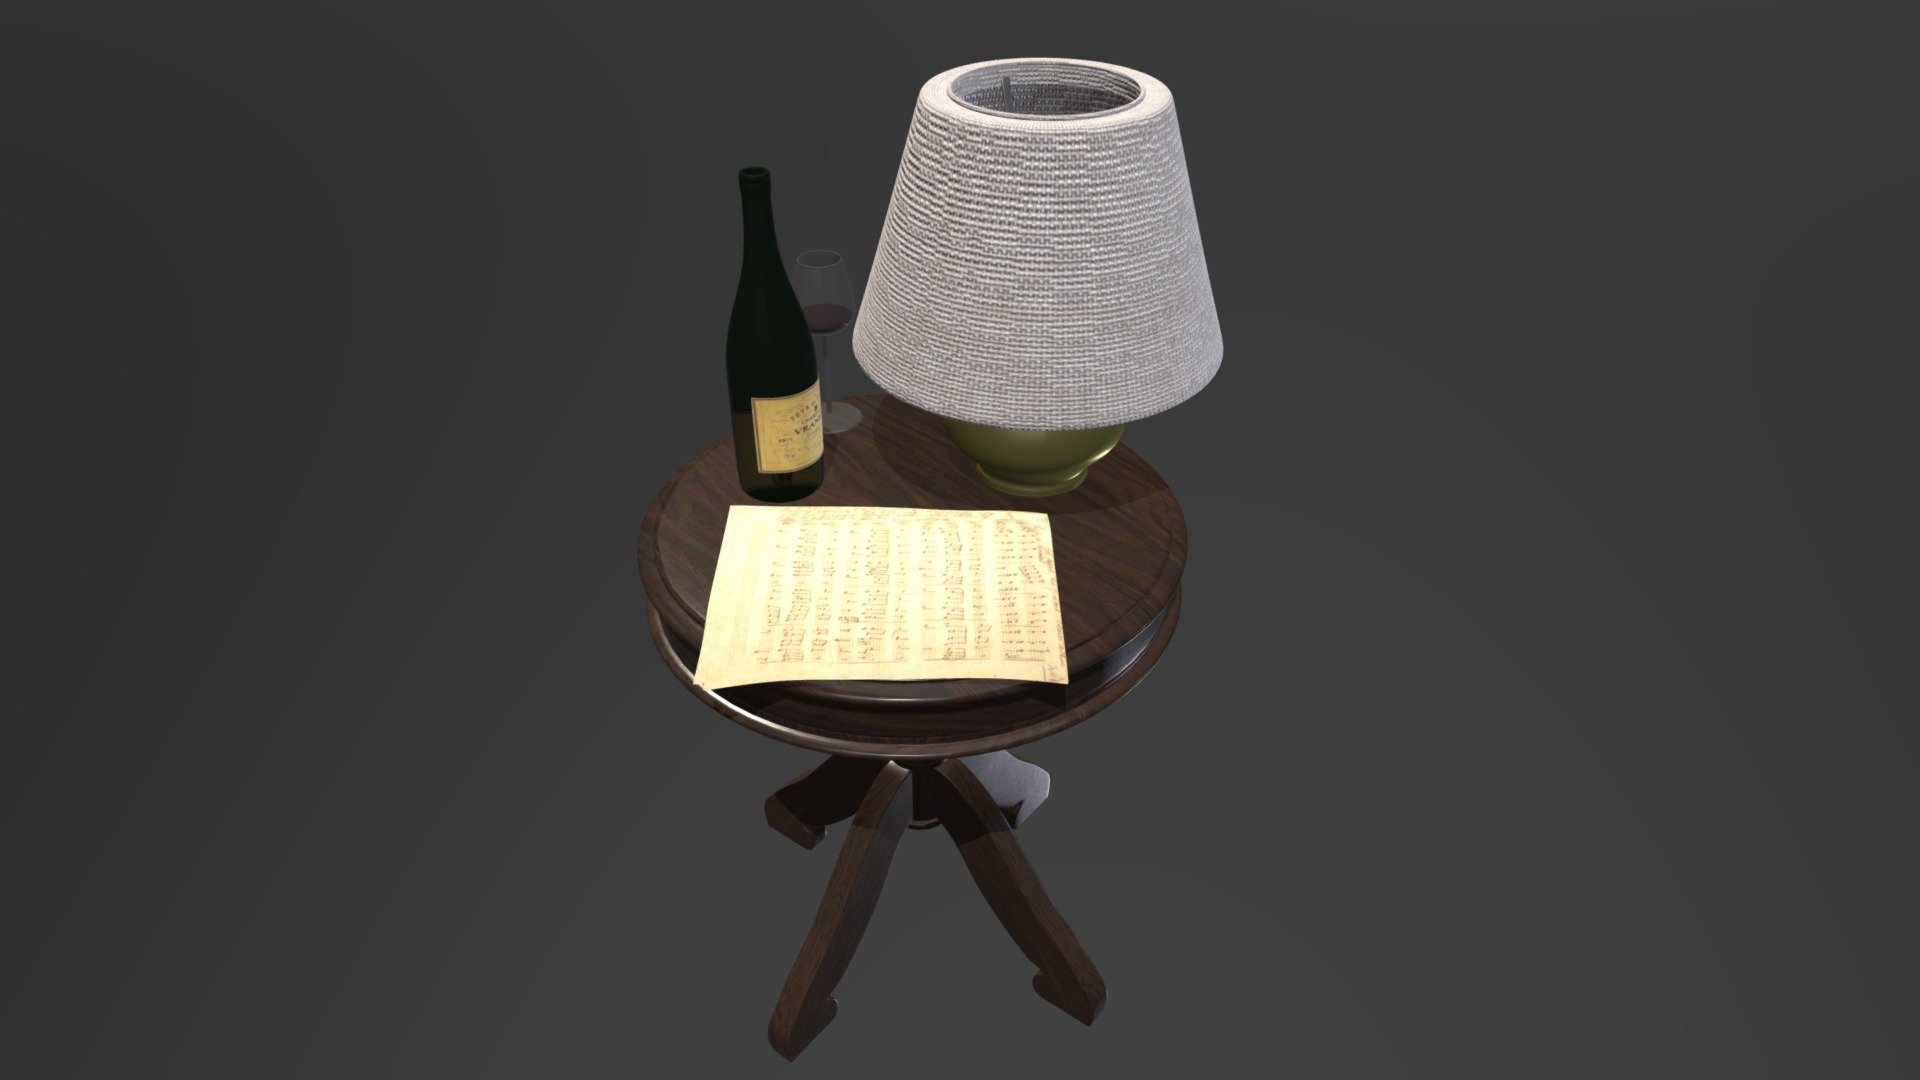 Table with a lamp, bottle, glass and music paper on it - Table - 3D model by Jere Haapaharju (@Haapis) 3d model